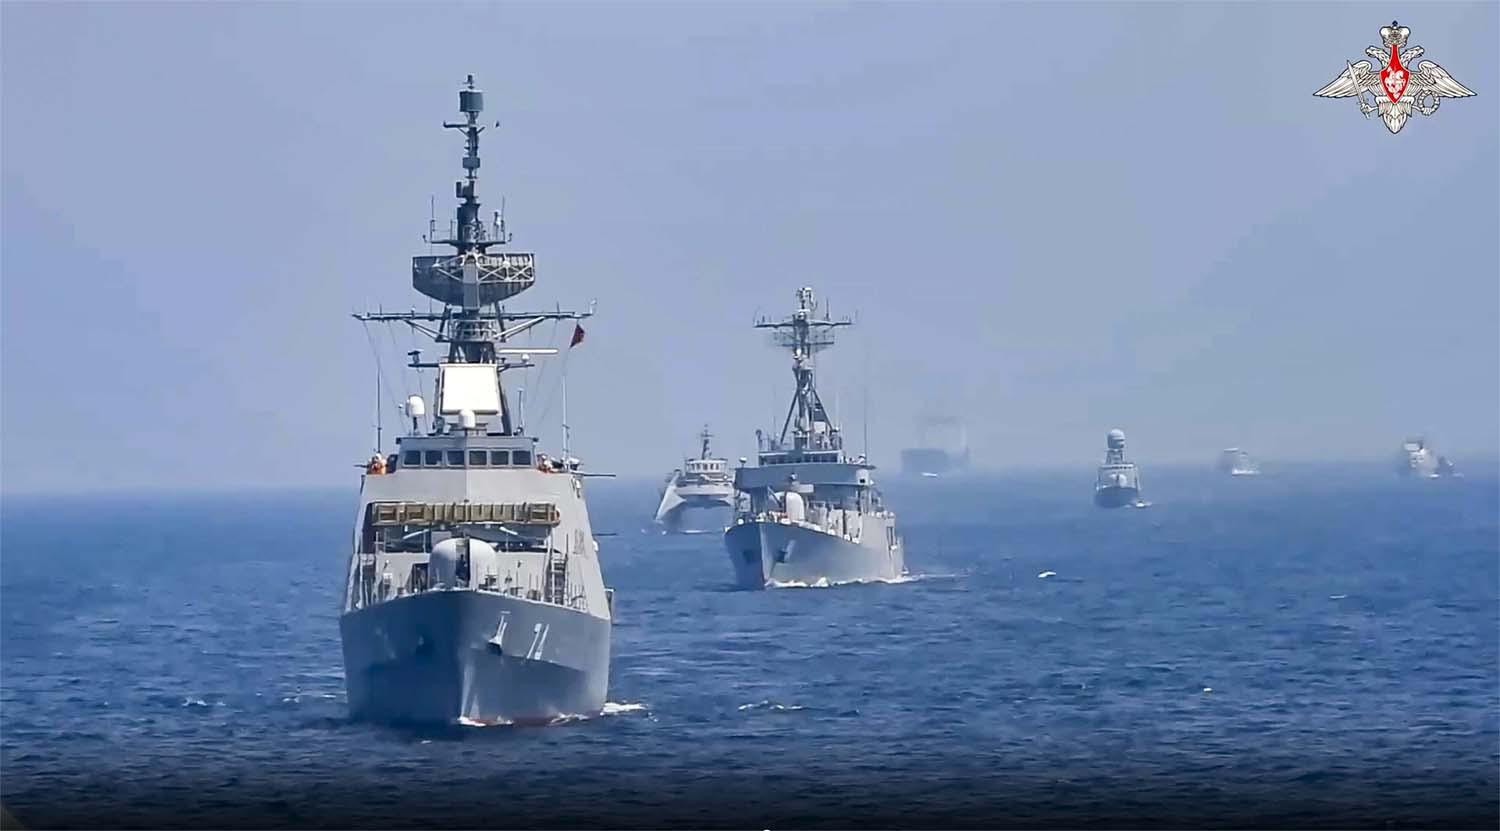 12 ships took part in the drills from March 15 to 19